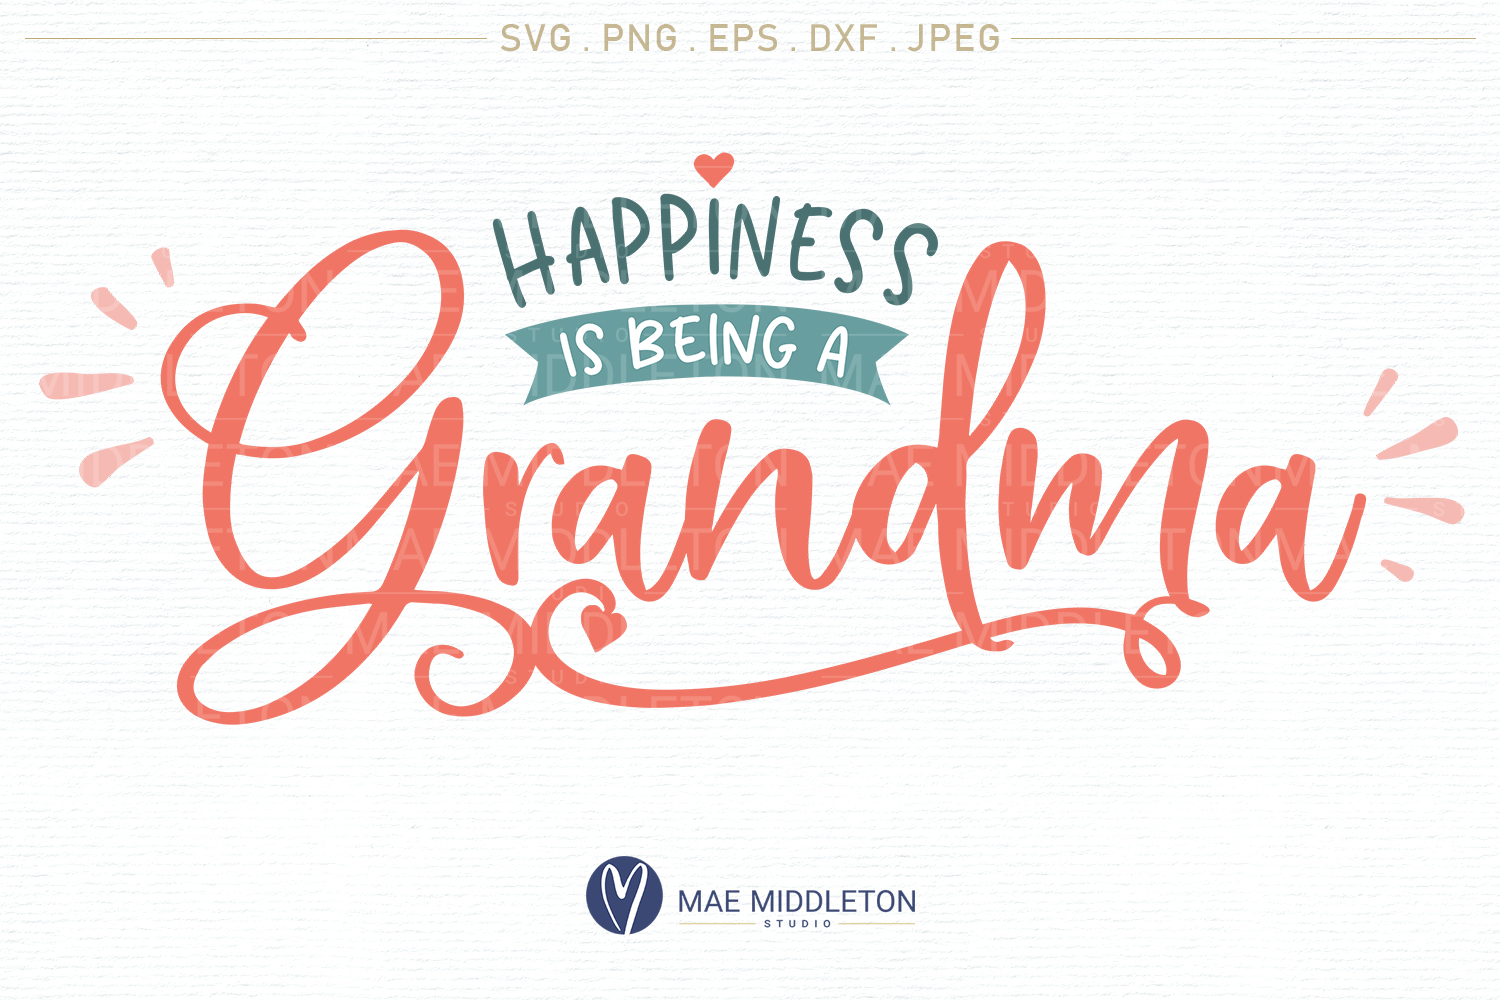 Happiness is being a Grandma, SVG design, PNG EPS DXF JPEG ...